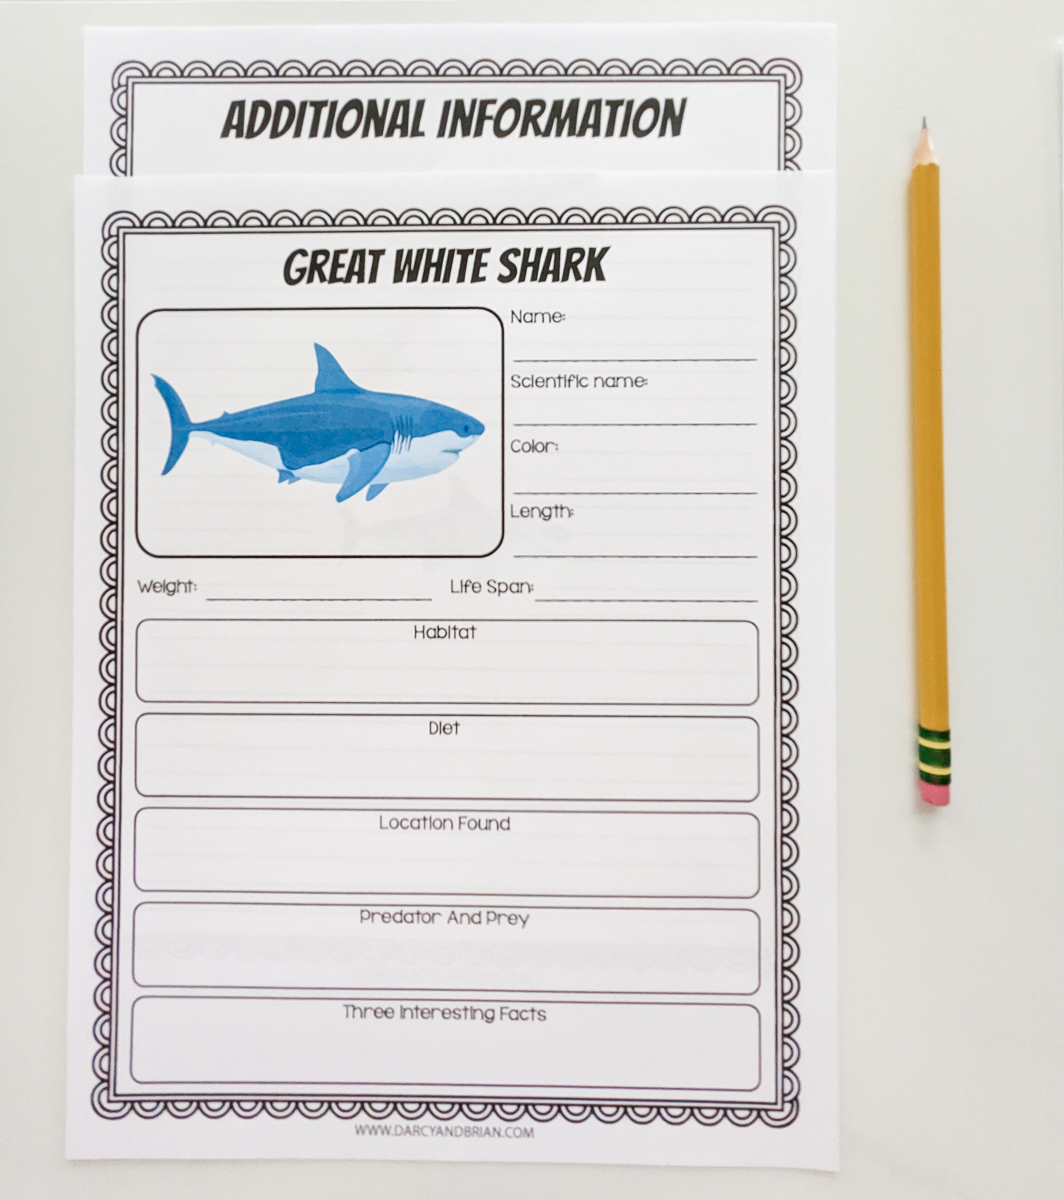 Worksheet to fill out about Great White Sharks and an additional page are printed out and laying  overlapping on a white desk next to a sharpened pencil.